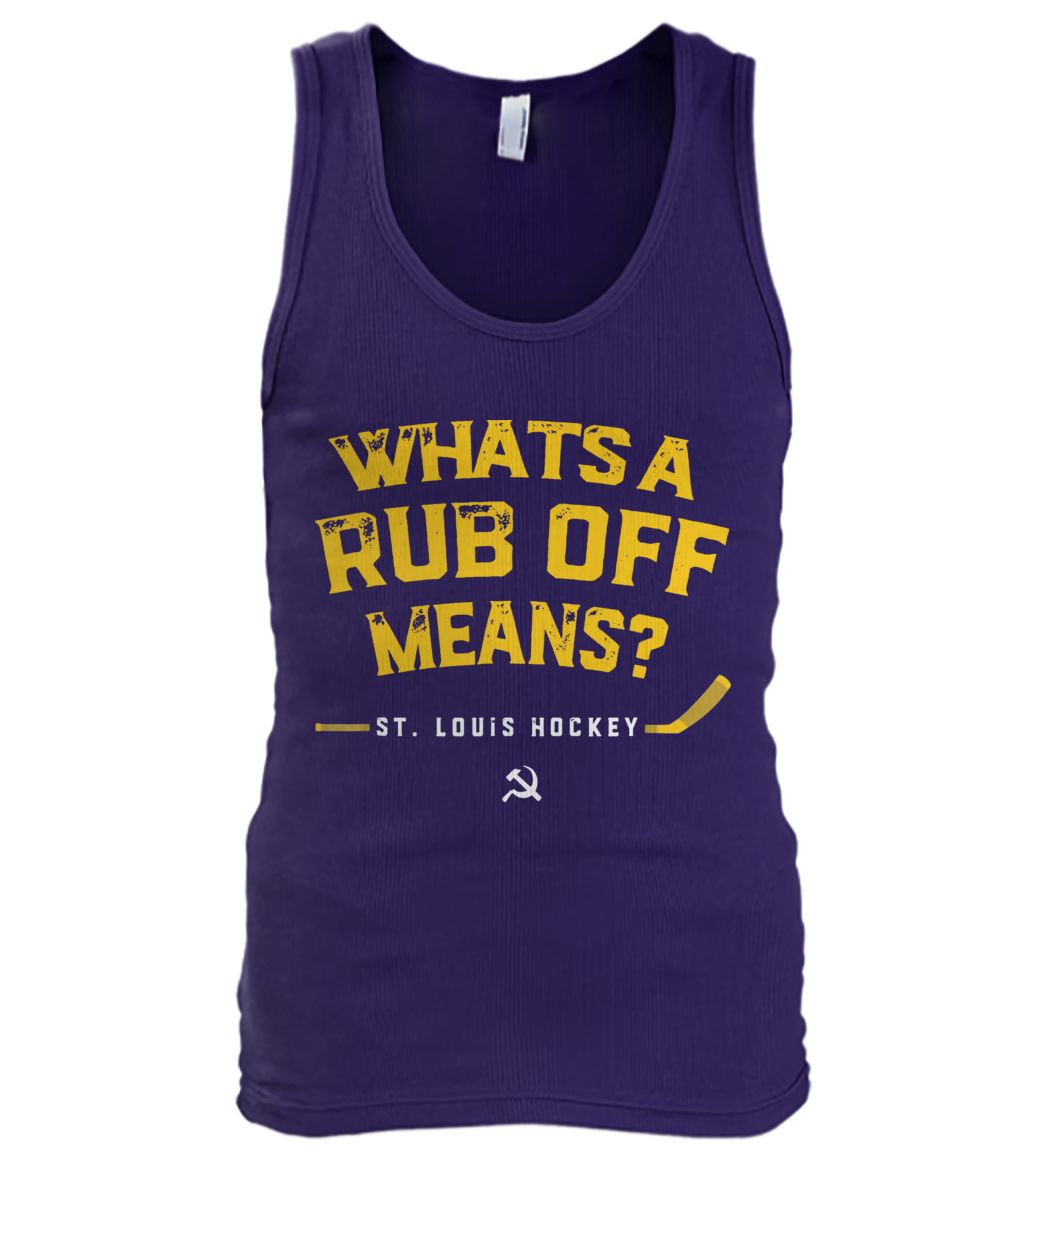 What's a rub off means st louis hockey men's tank top